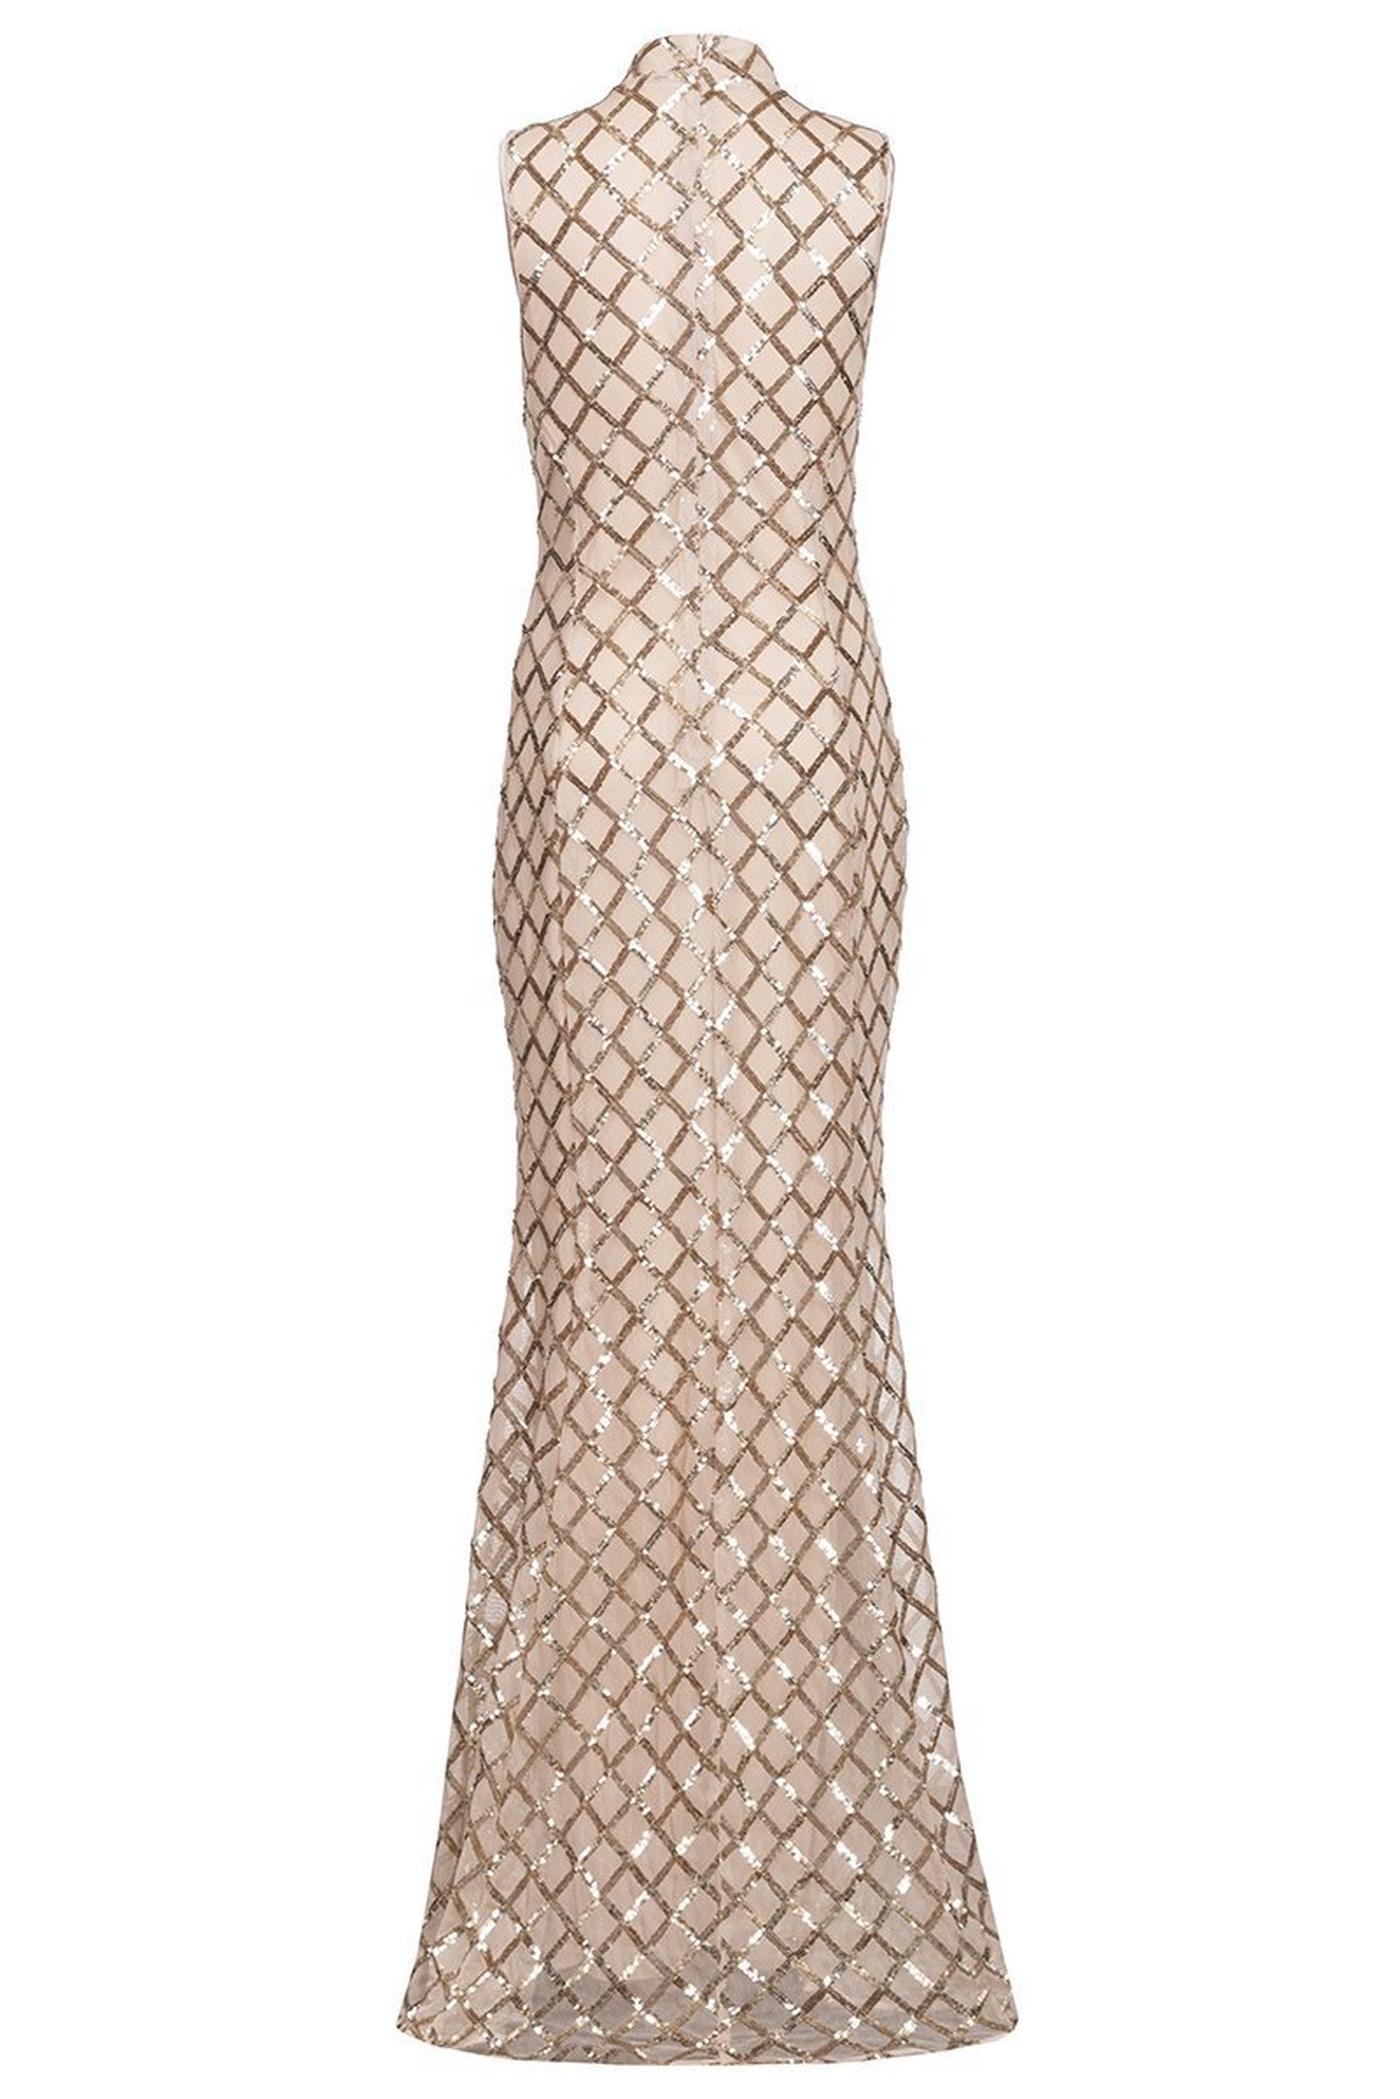 Champagne And Gold Sequin High Neck Fishtail Maxi Dress